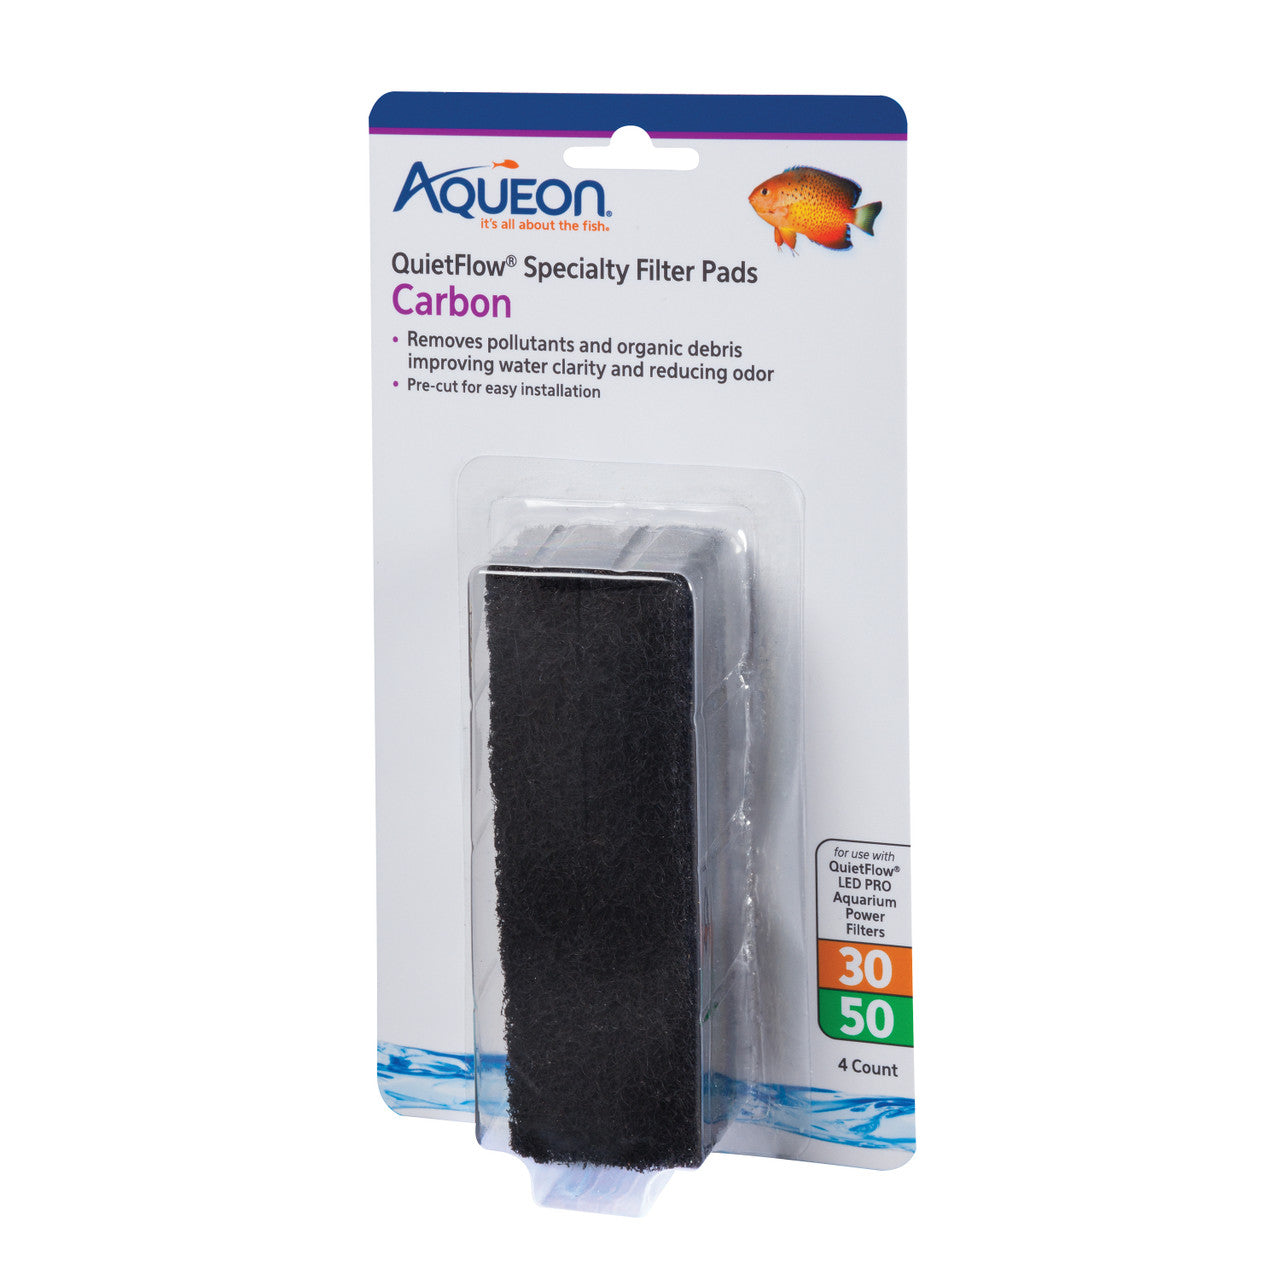 Aqueon Replacement Specialty Filter Pads Carbon 30/50